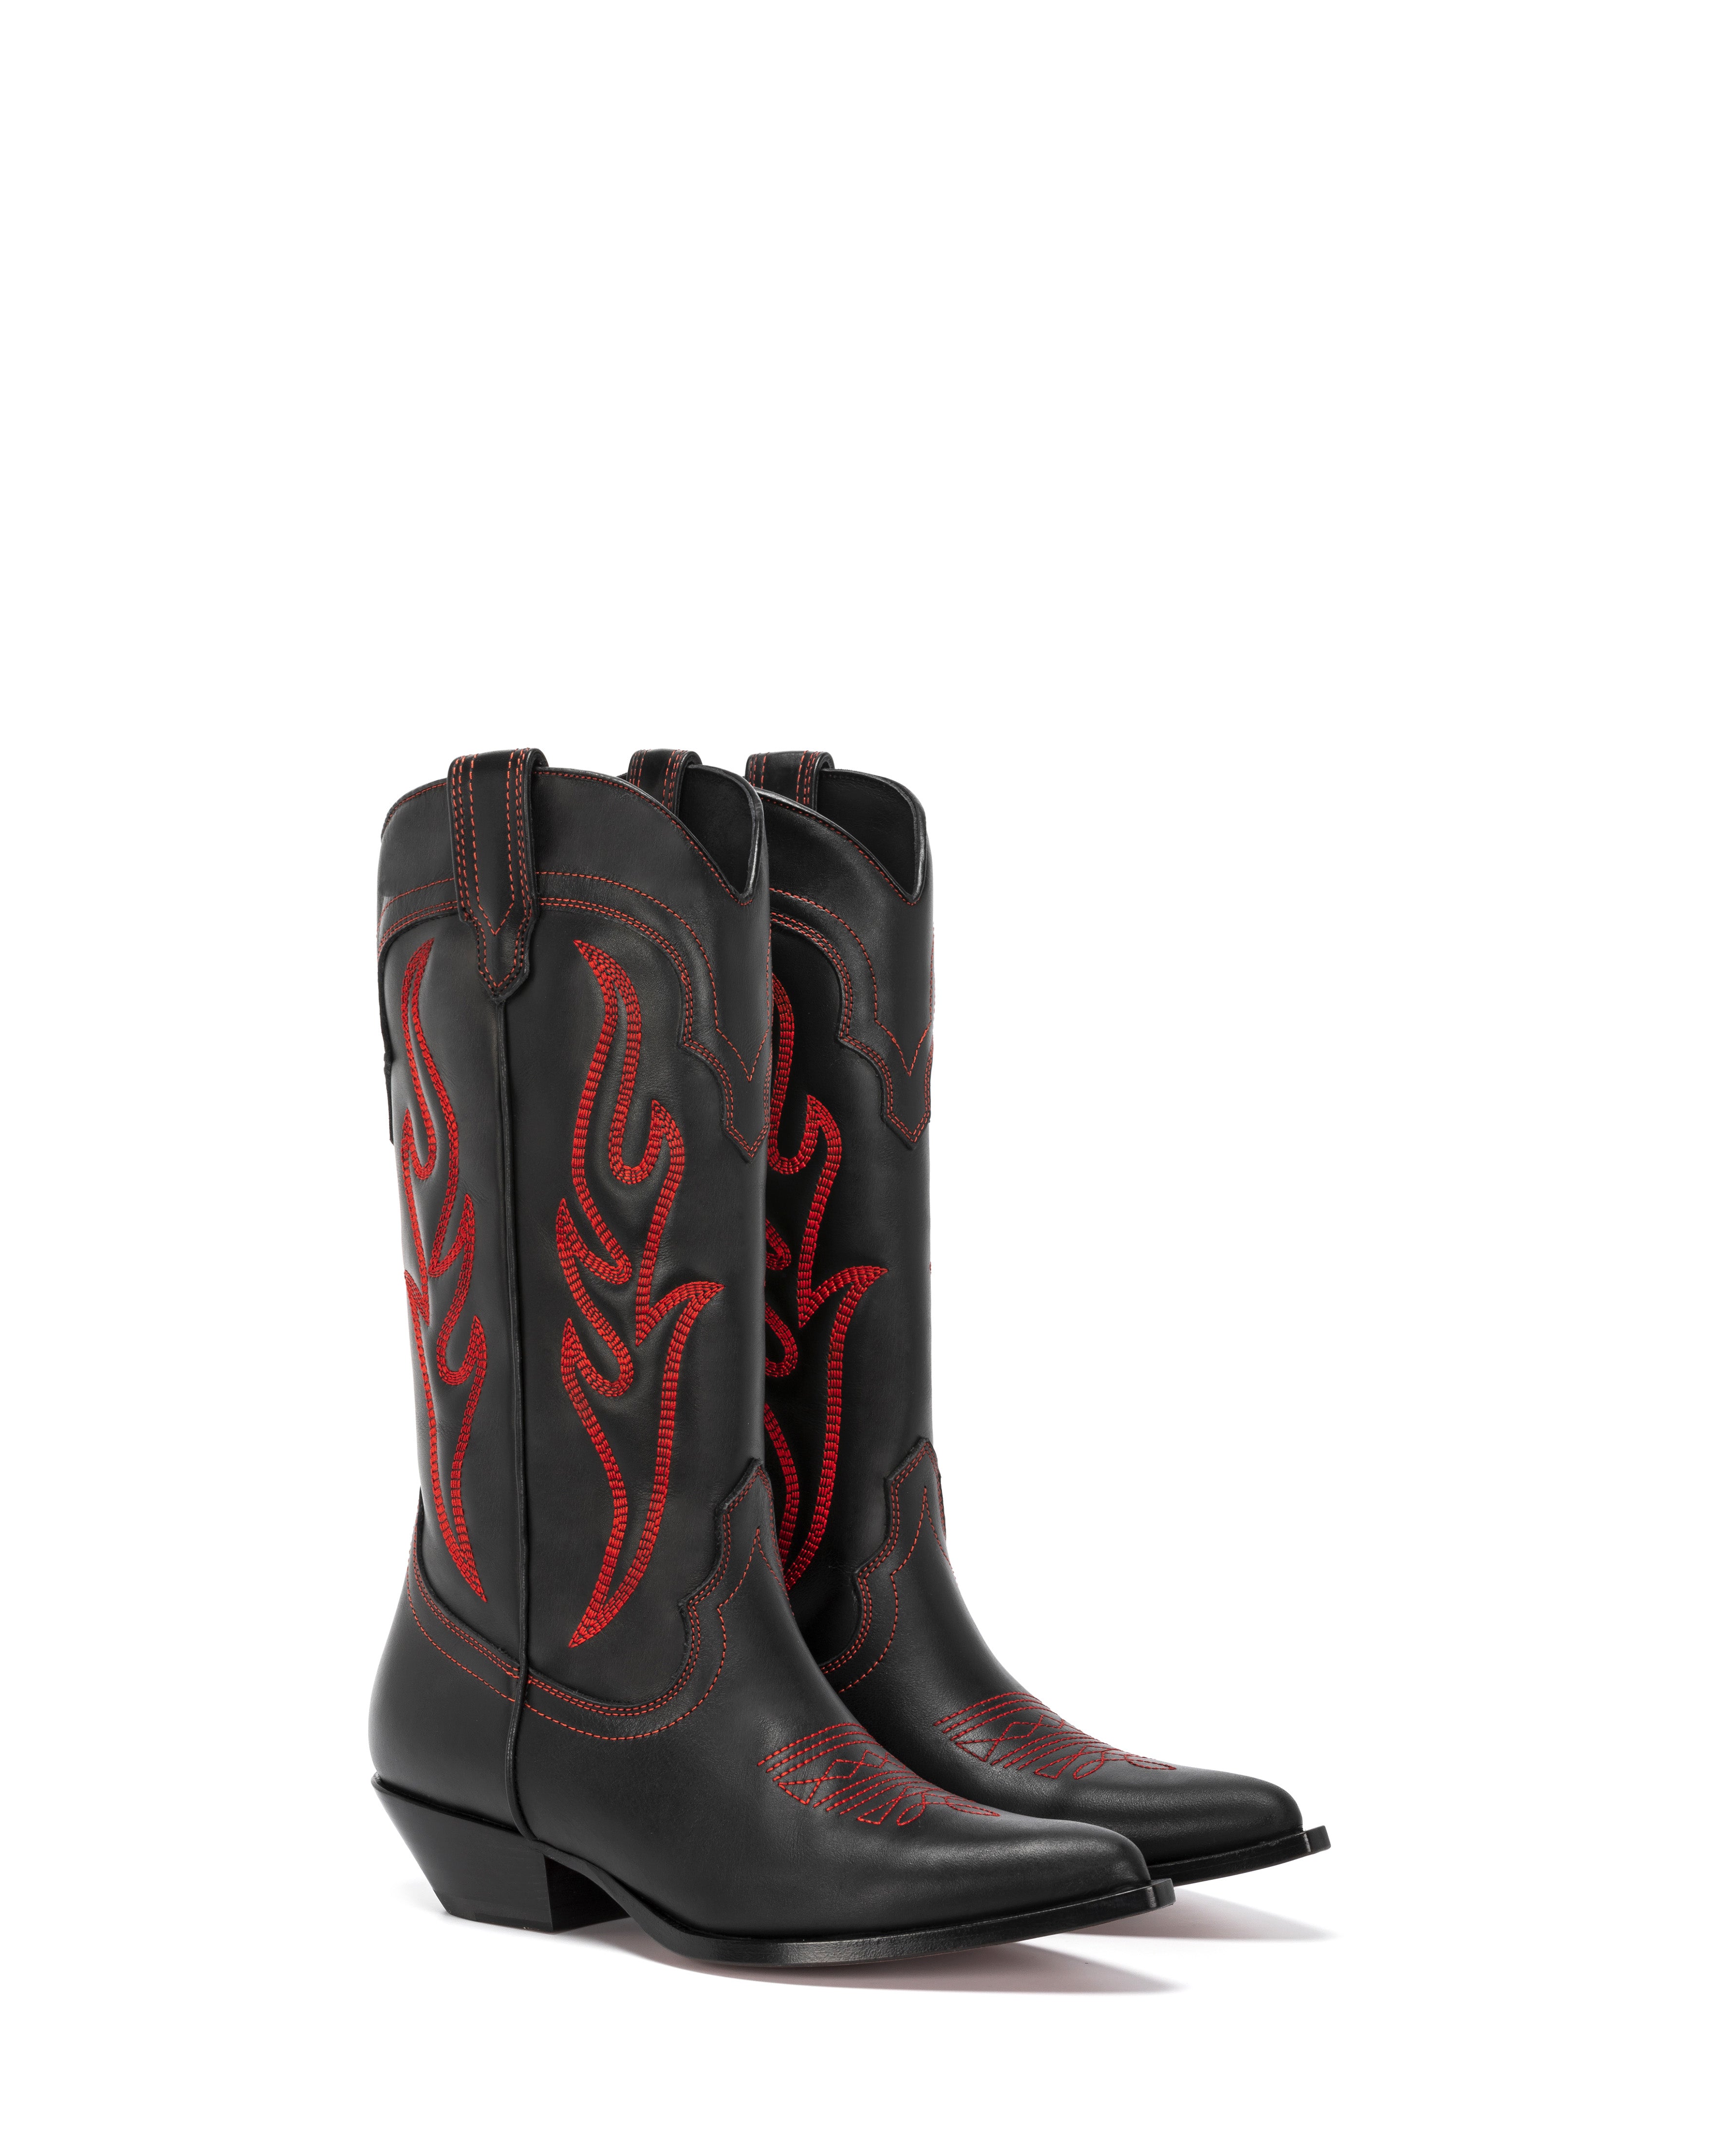 Woman Cowboy Boots in Black Calfskin with Red Embroidery | SANTA